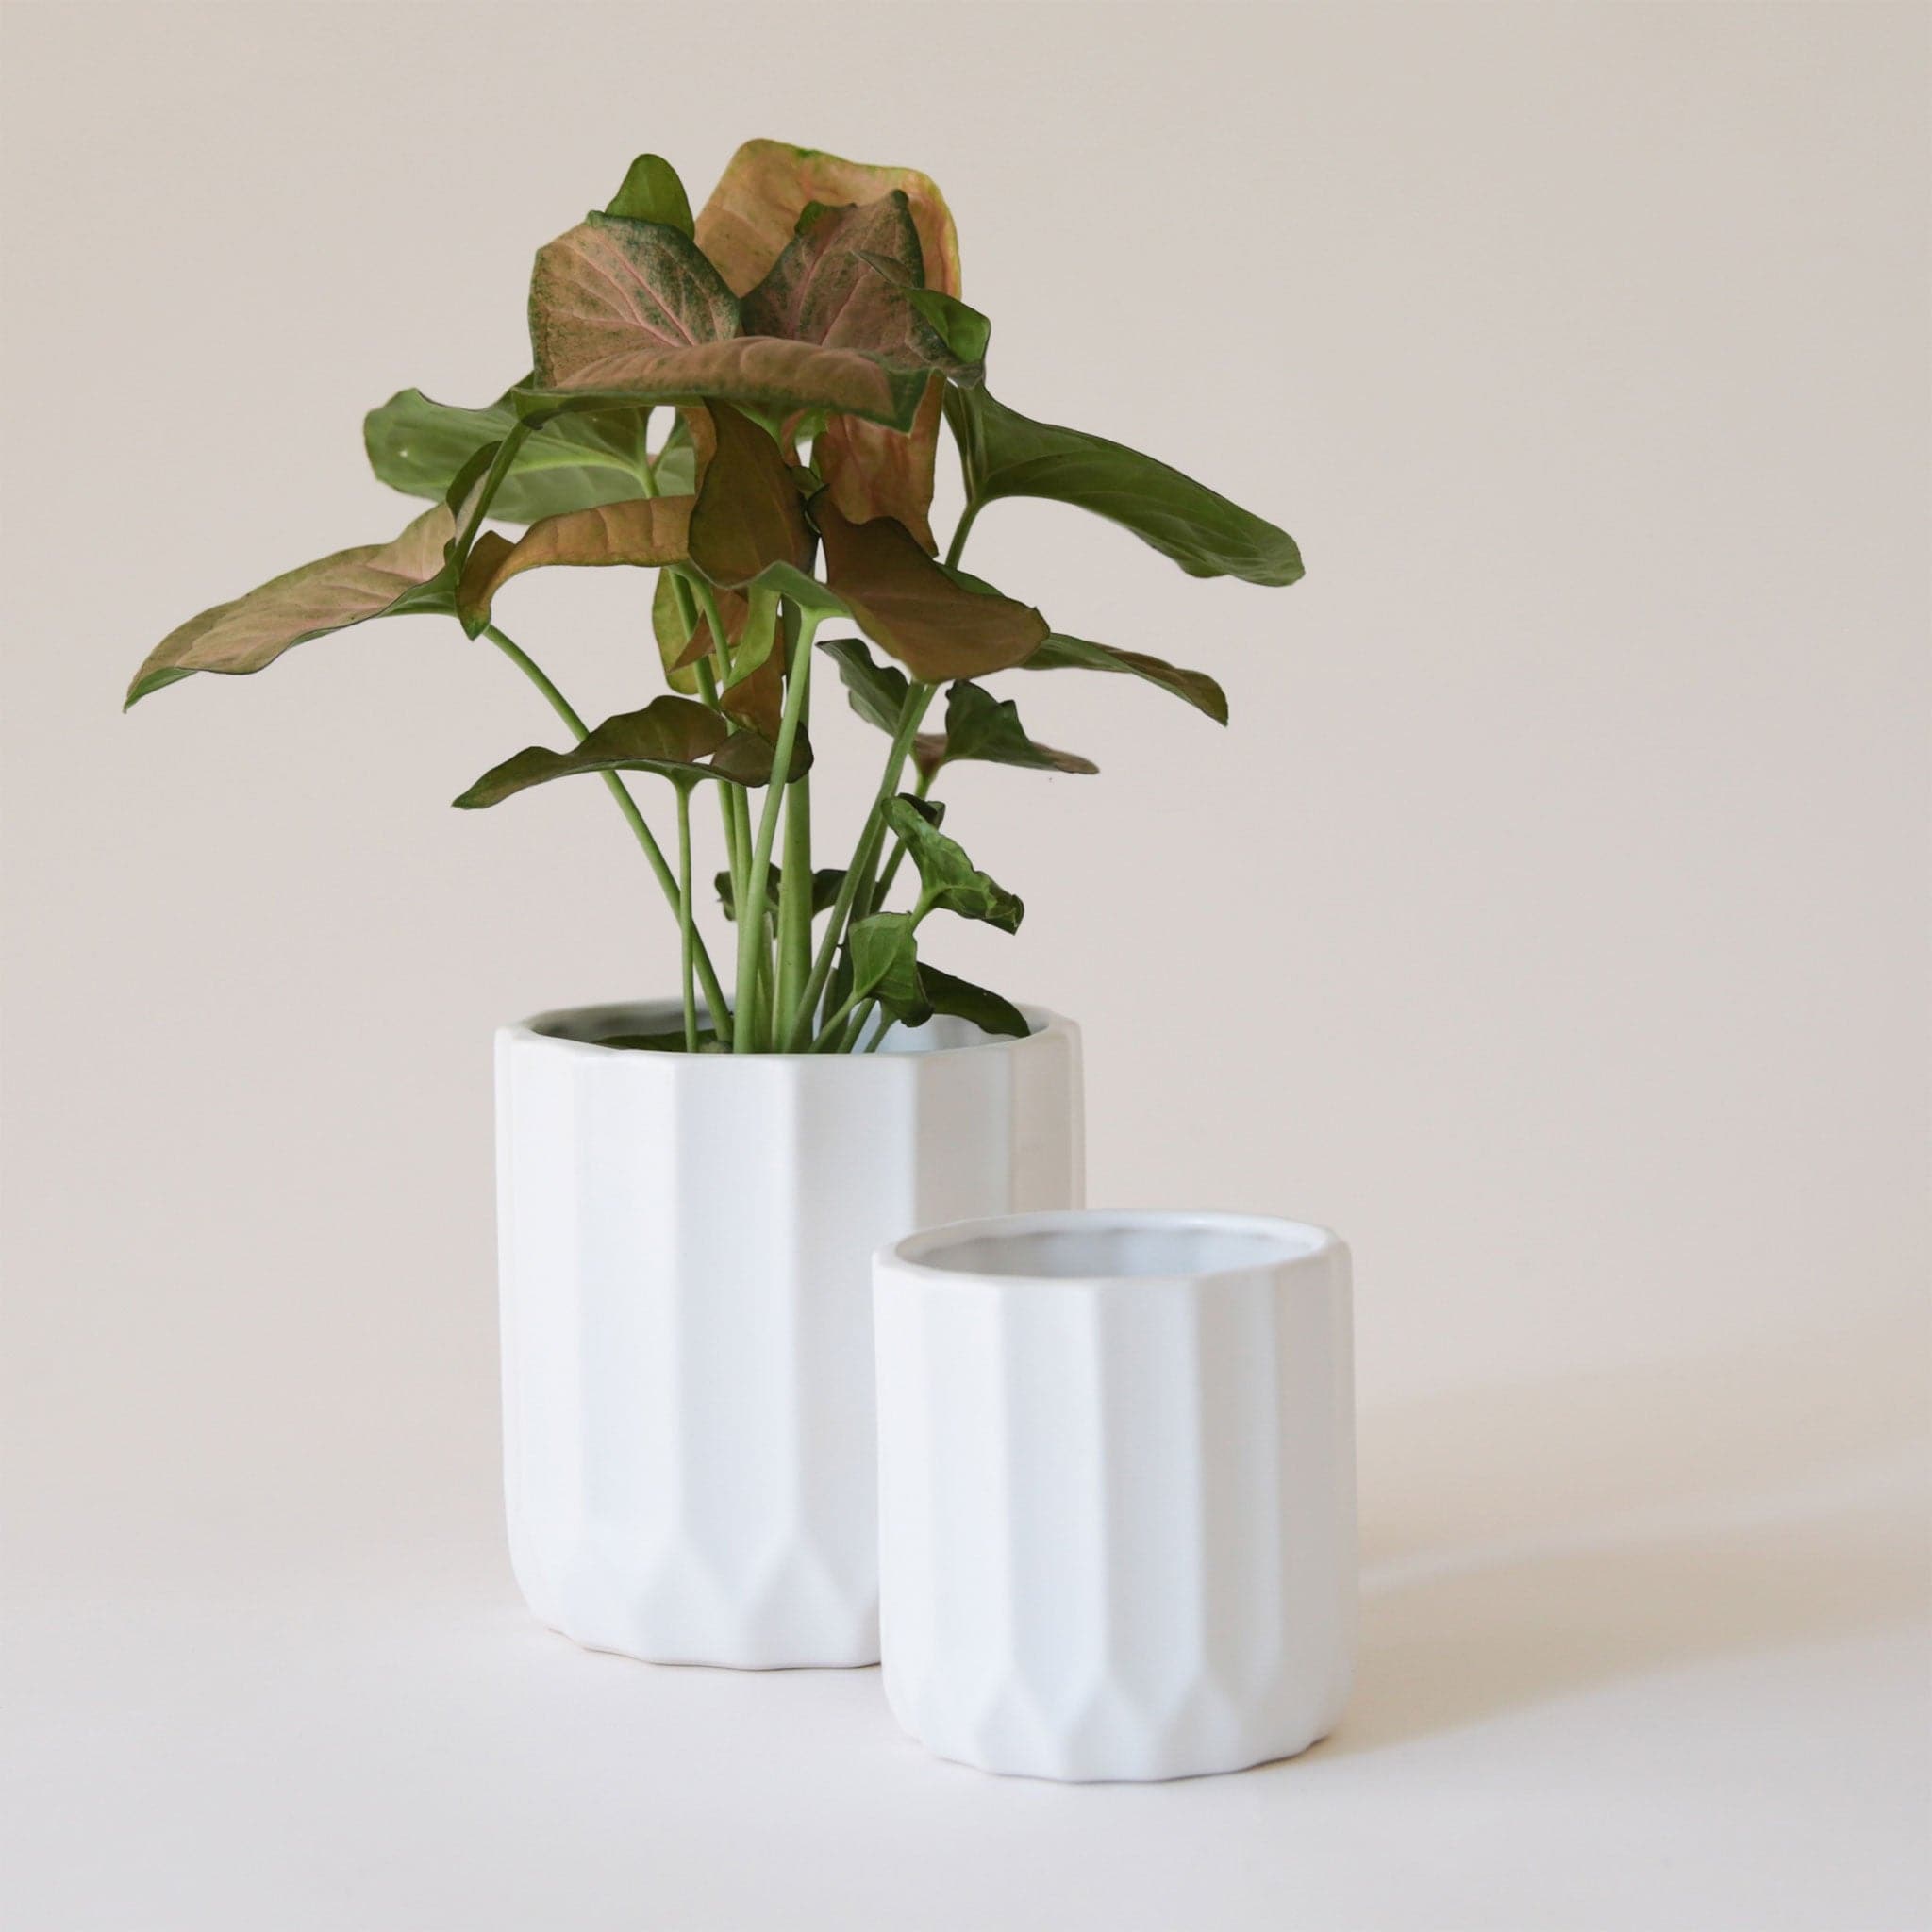 On a cream background is two different sized white ceramic pots with a fluted detail around the edges. 